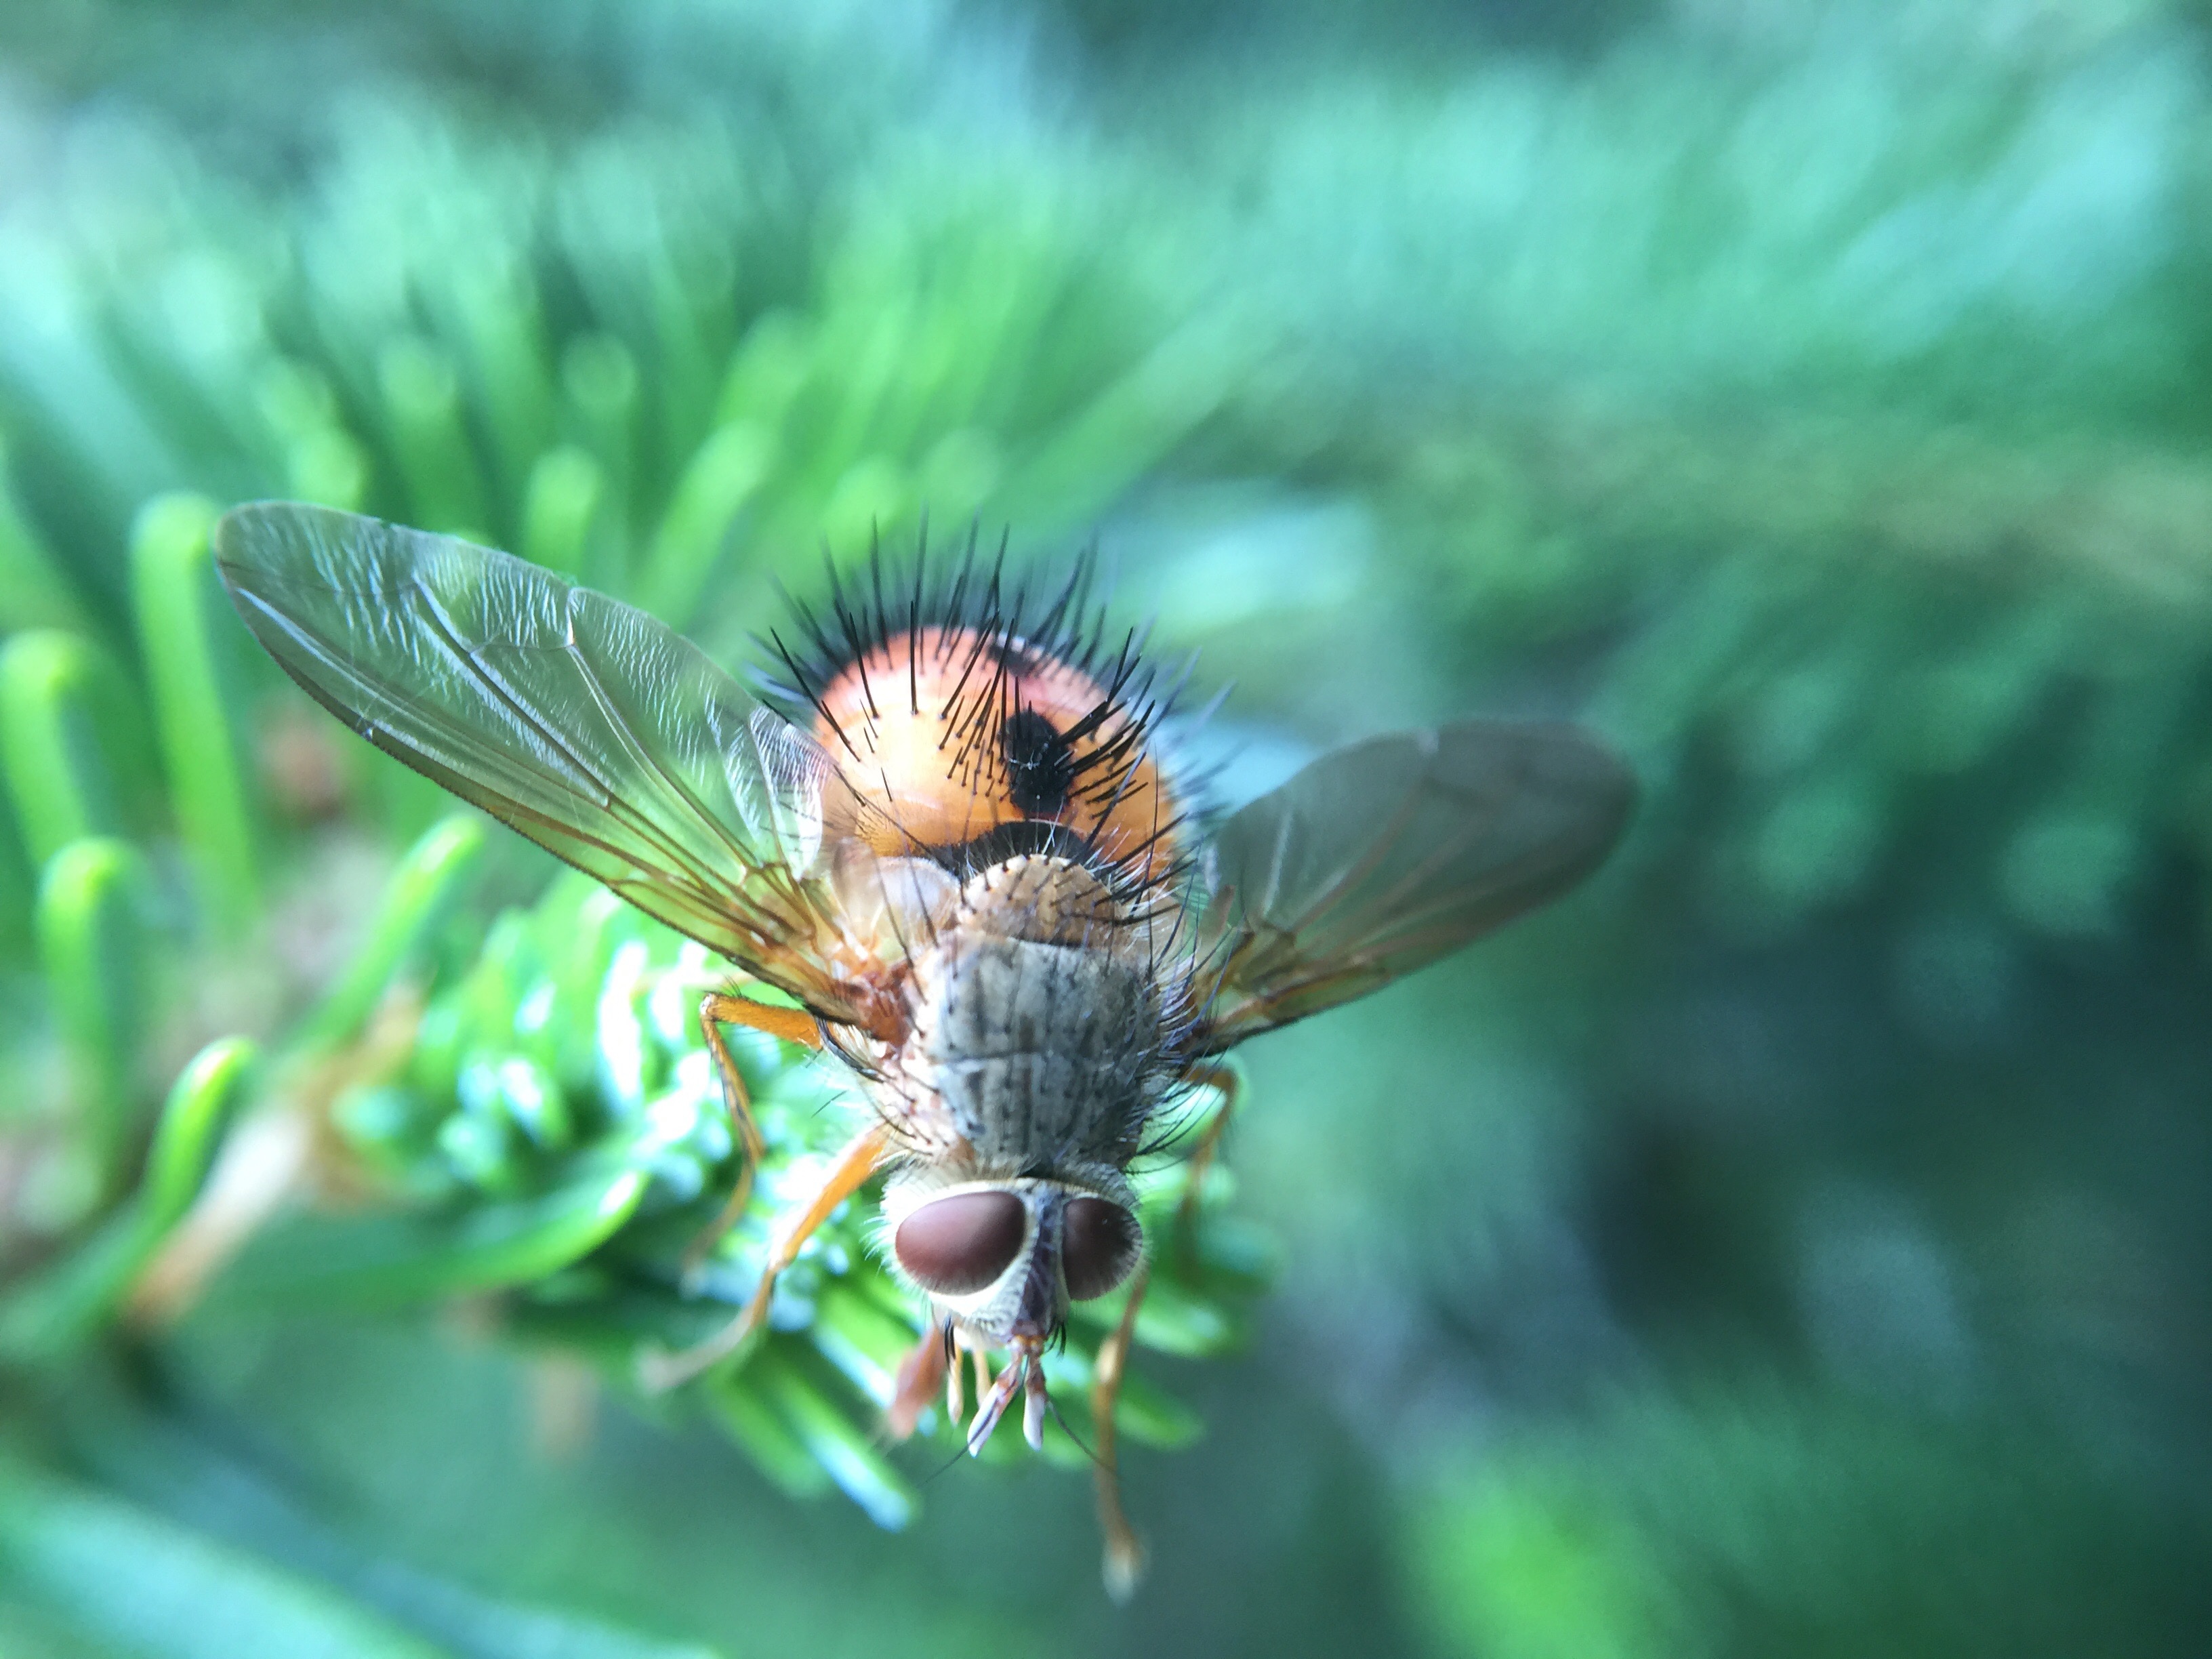 Fly, Dirty, Flying, Green, Insect, HQ Photo